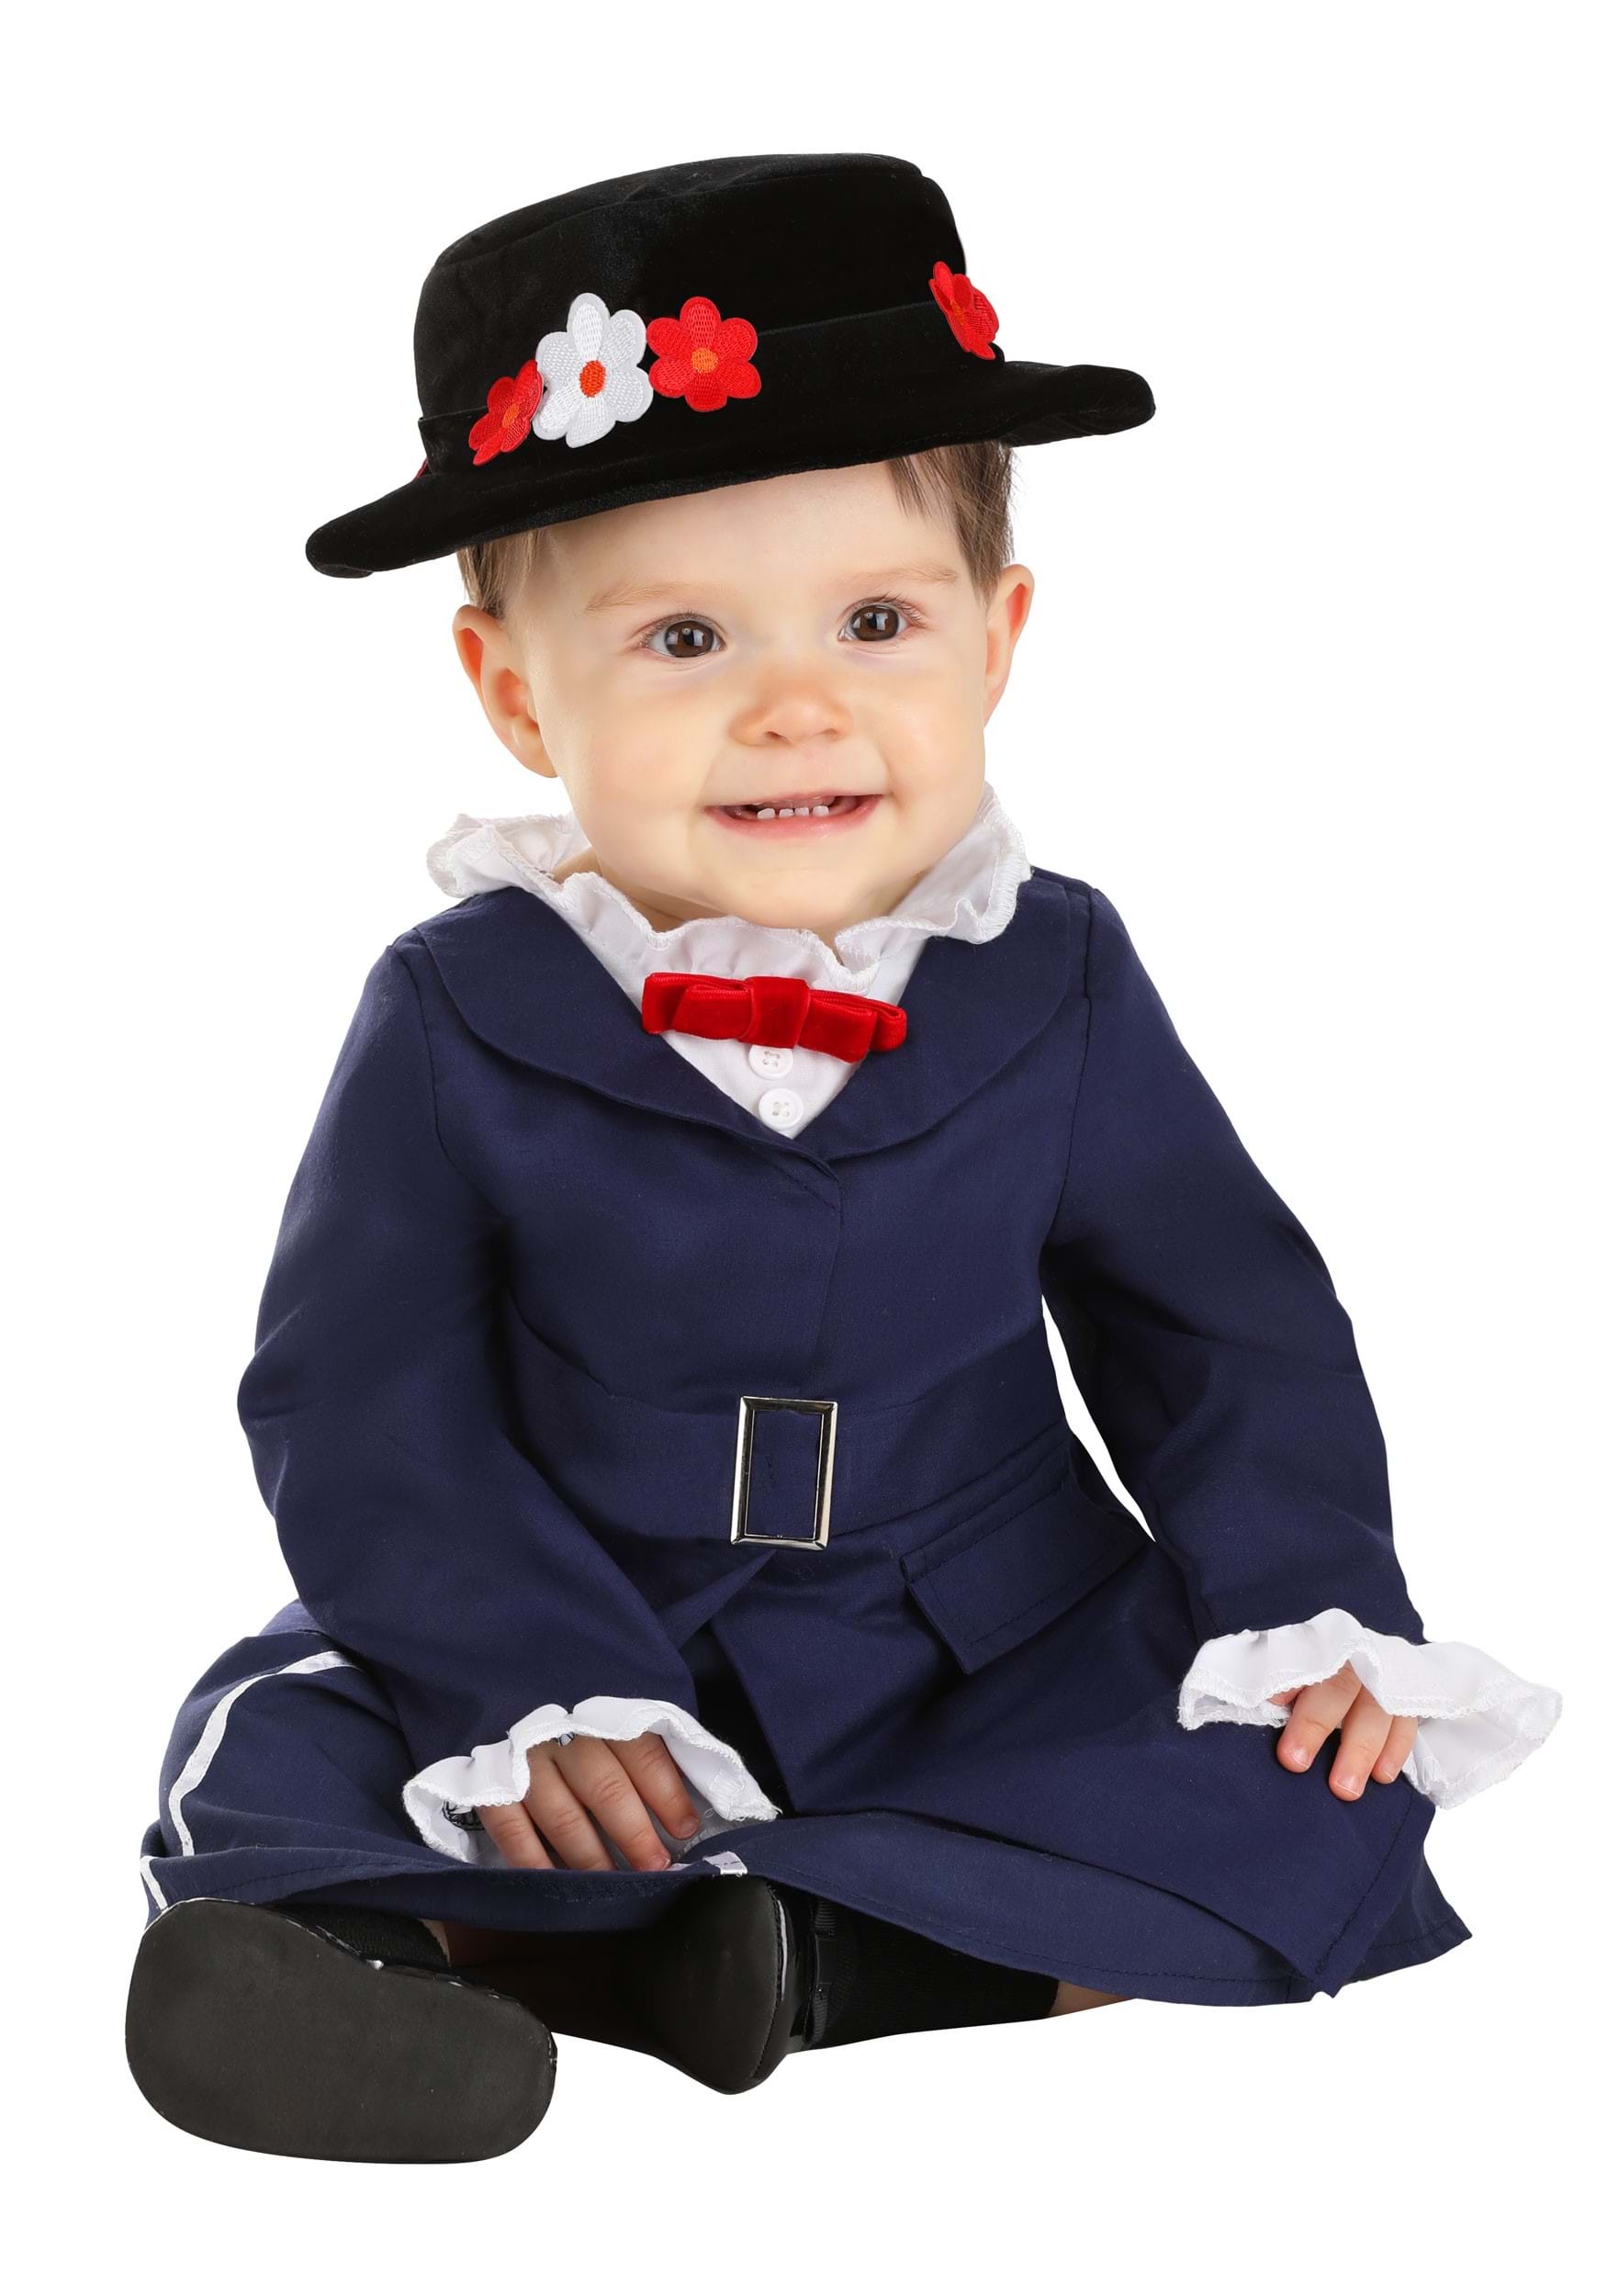 Mary Poppins Costume for Infant